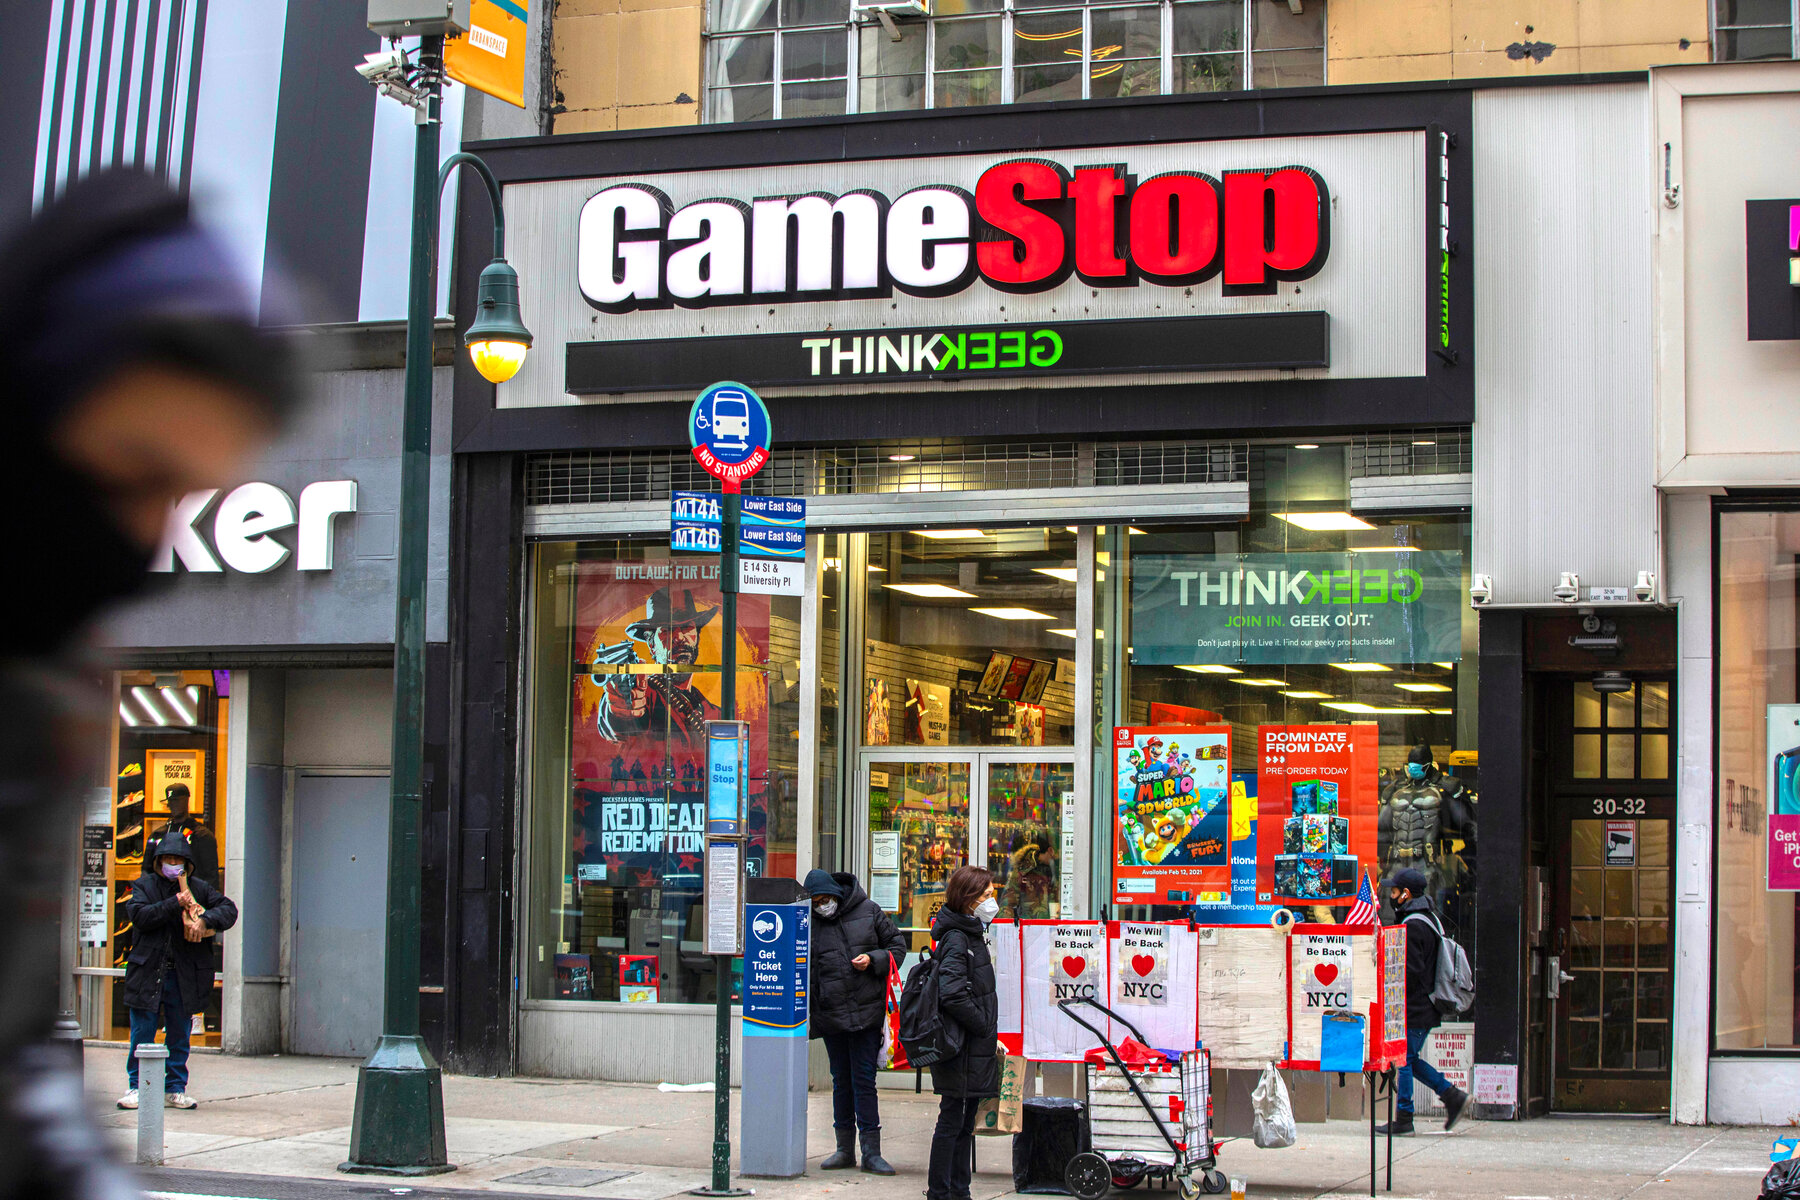 Cancelled Canon: San Andreas Hot coffee  - gamestop wall street - Gamestop THINK1333 ker M120 Litter Thinks Geek Out Mate Roman Er 3032 Red Teat Netem Teen Nye Nyc Nyc